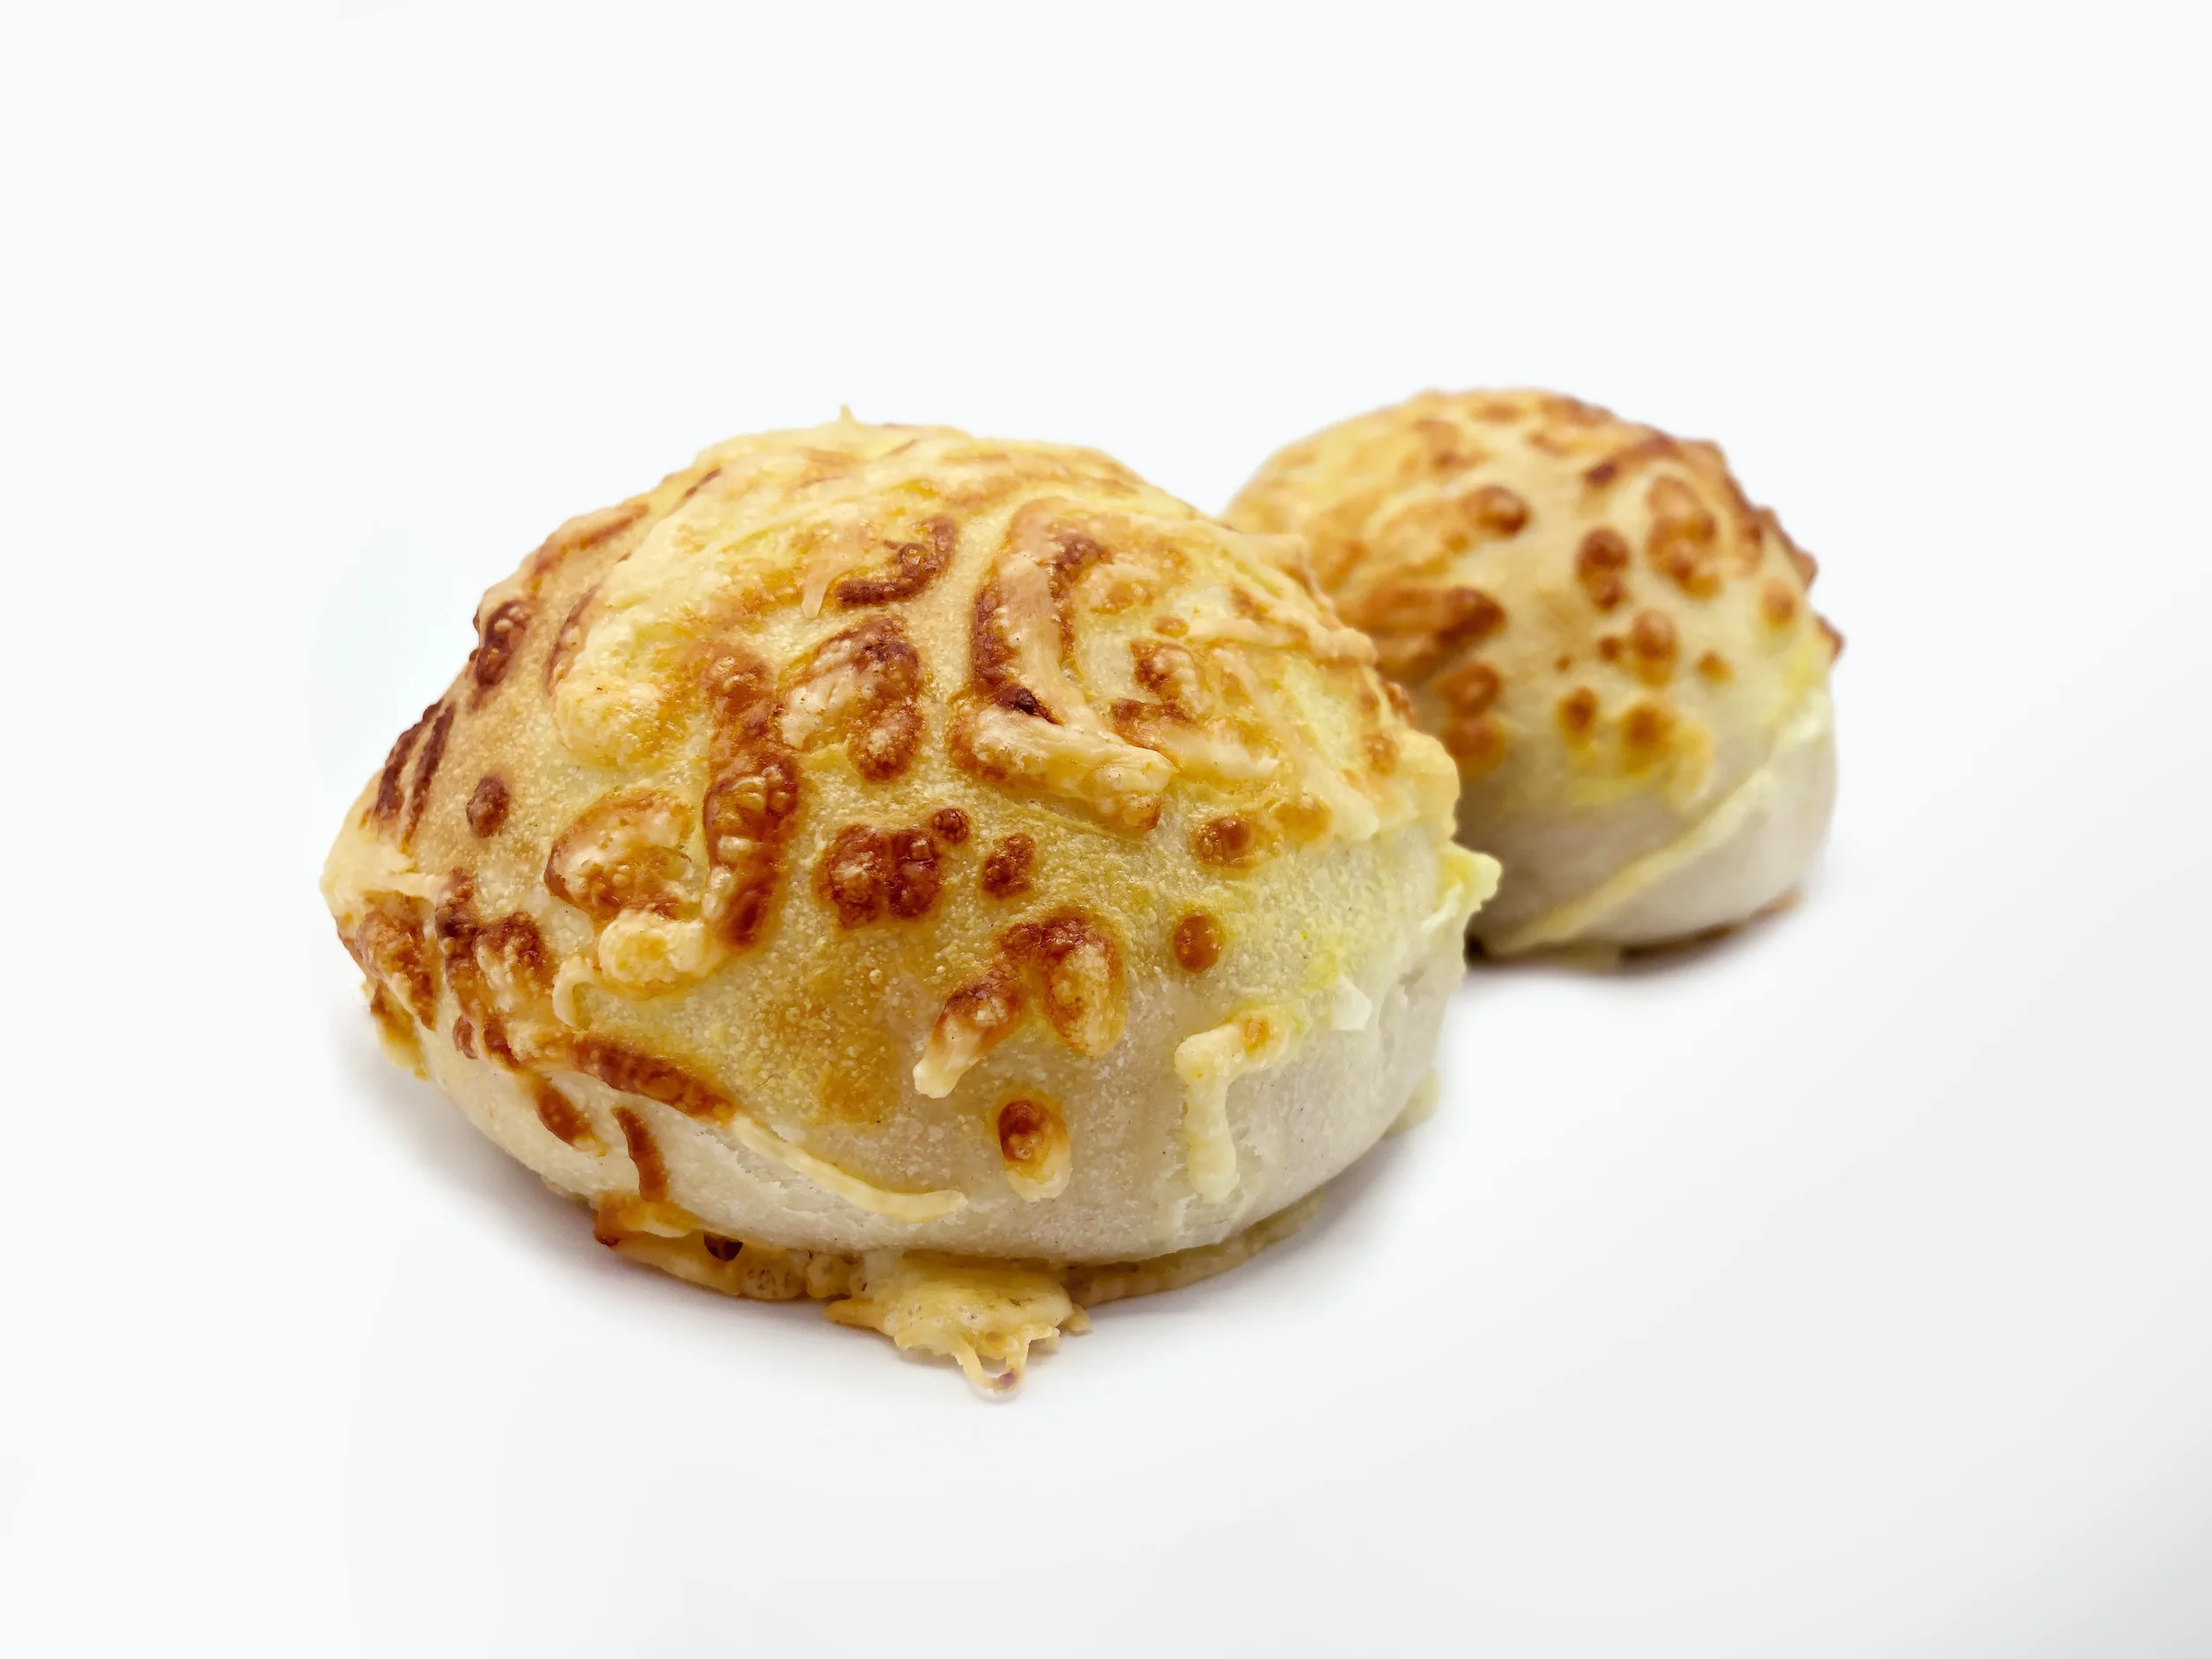 Buns topped with cheese